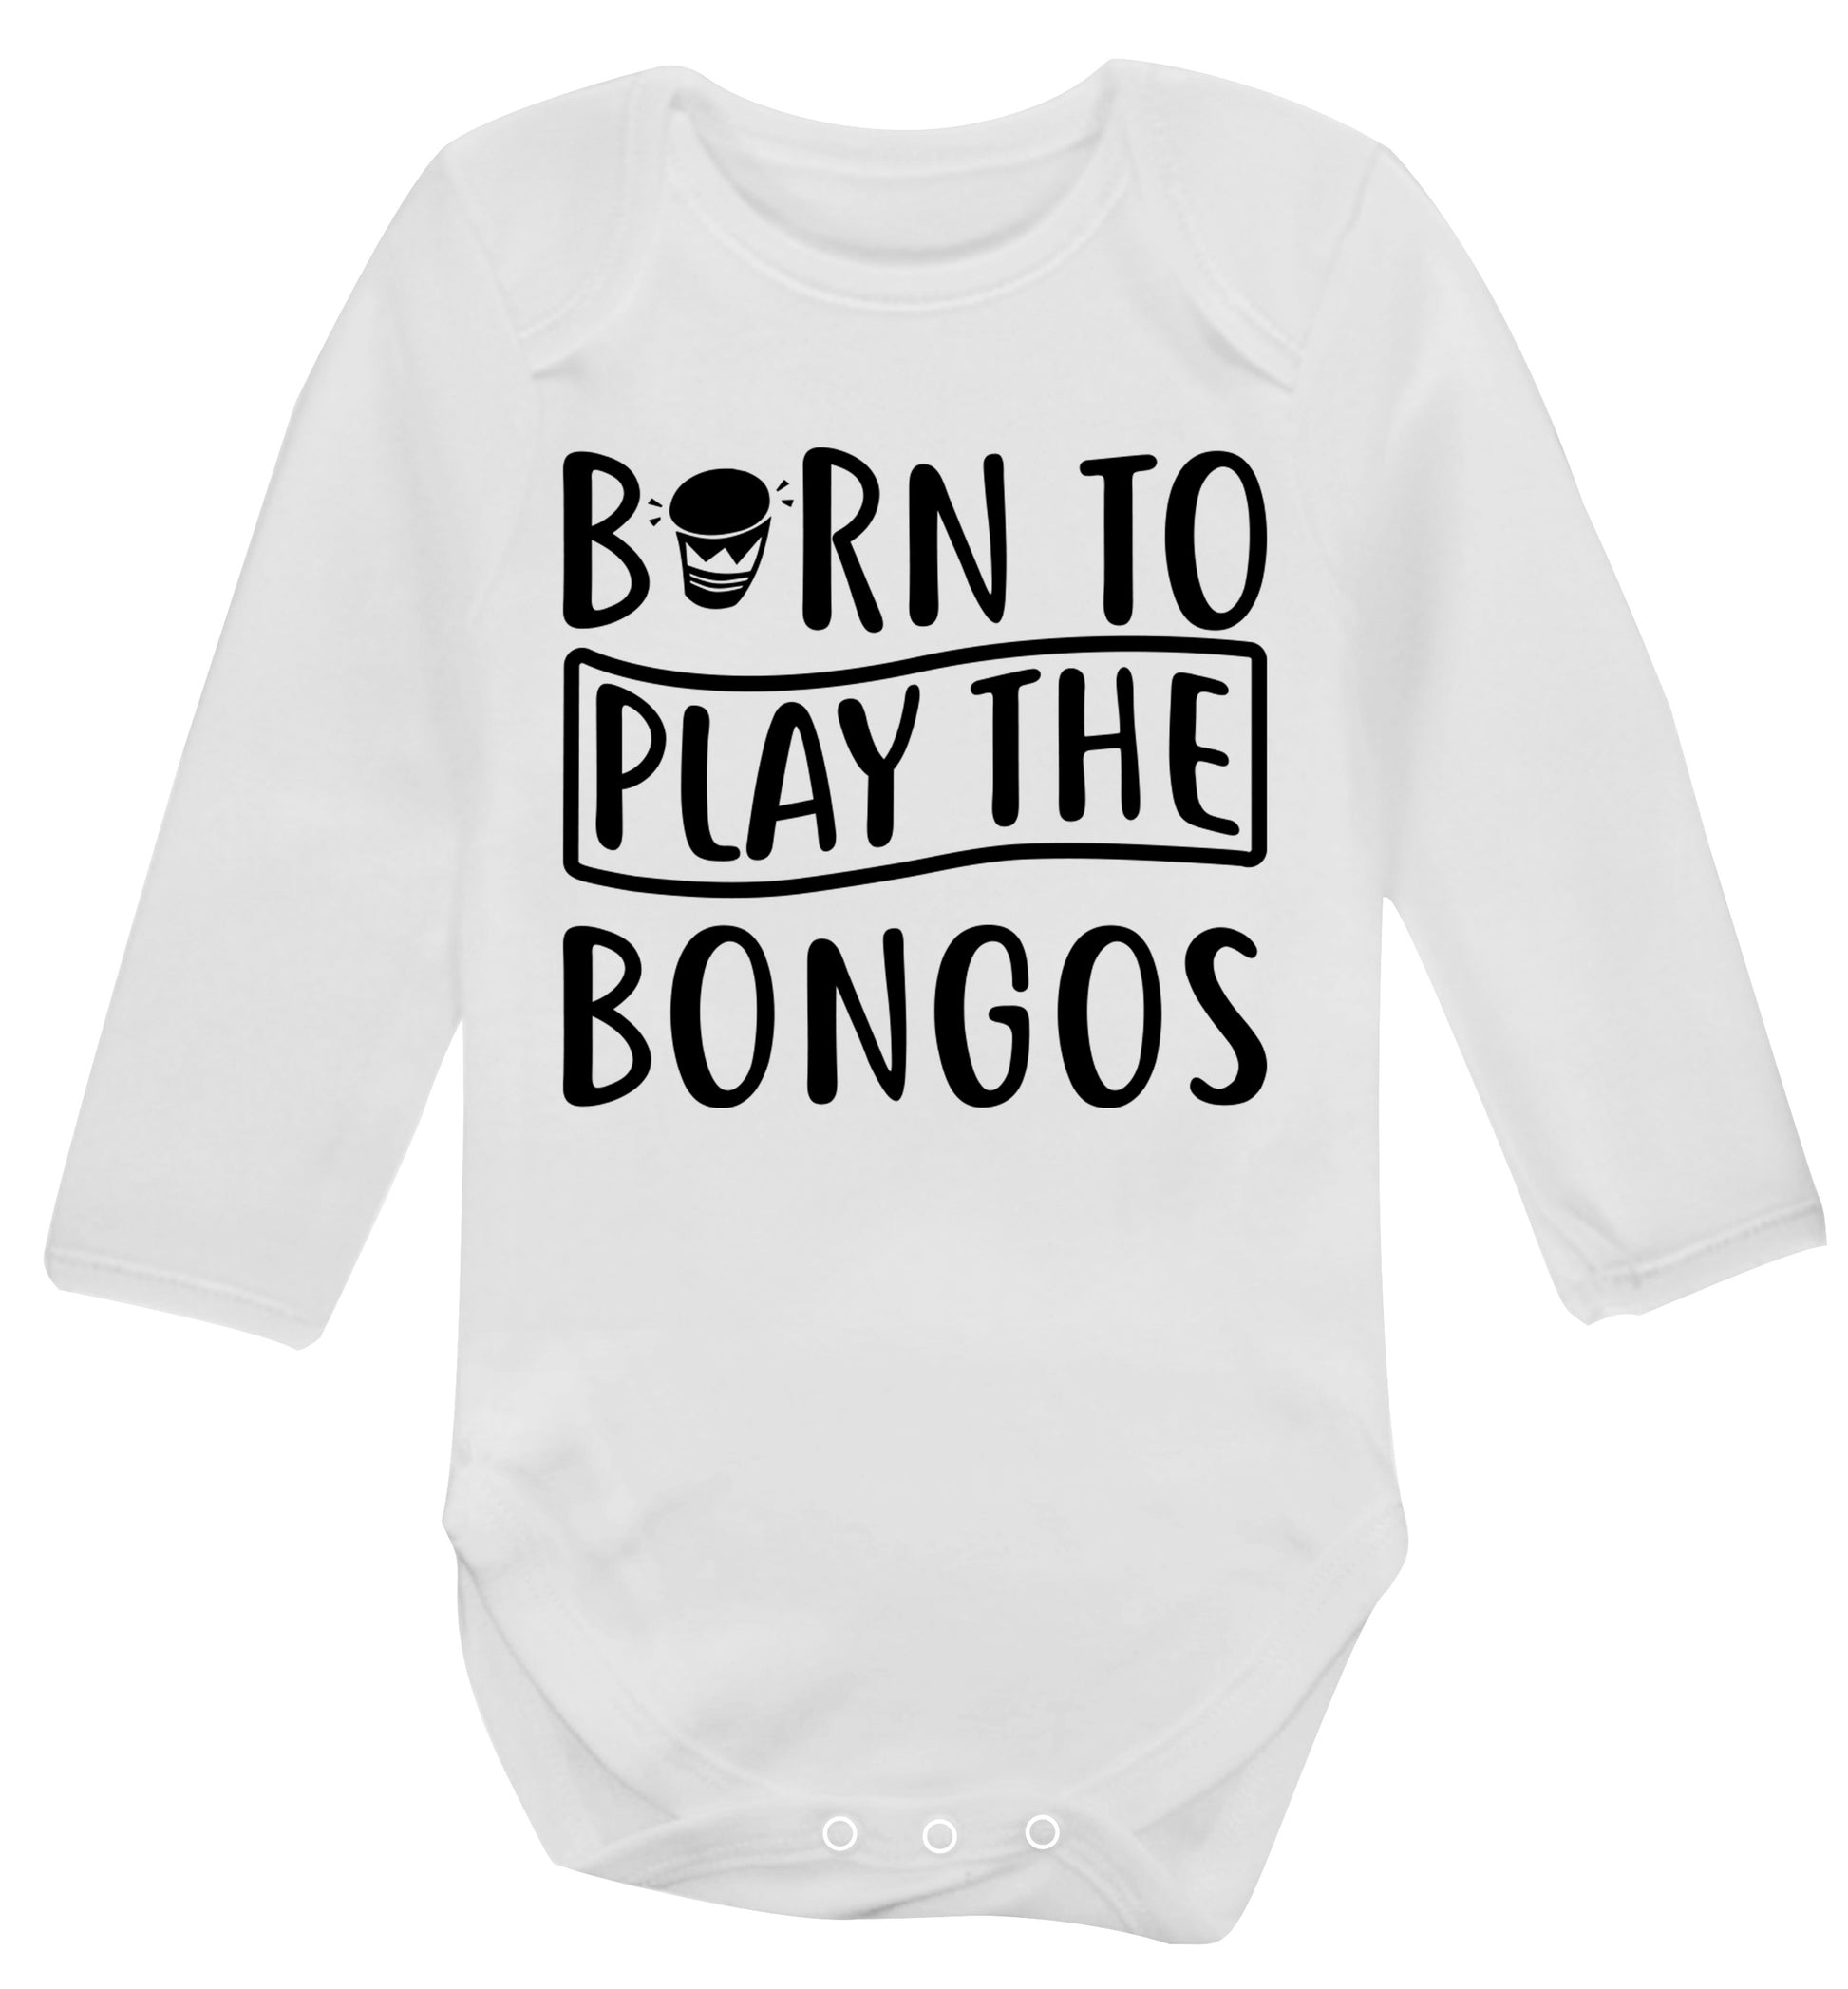 Born to play the bongos Baby Vest long sleeved white 6-12 months